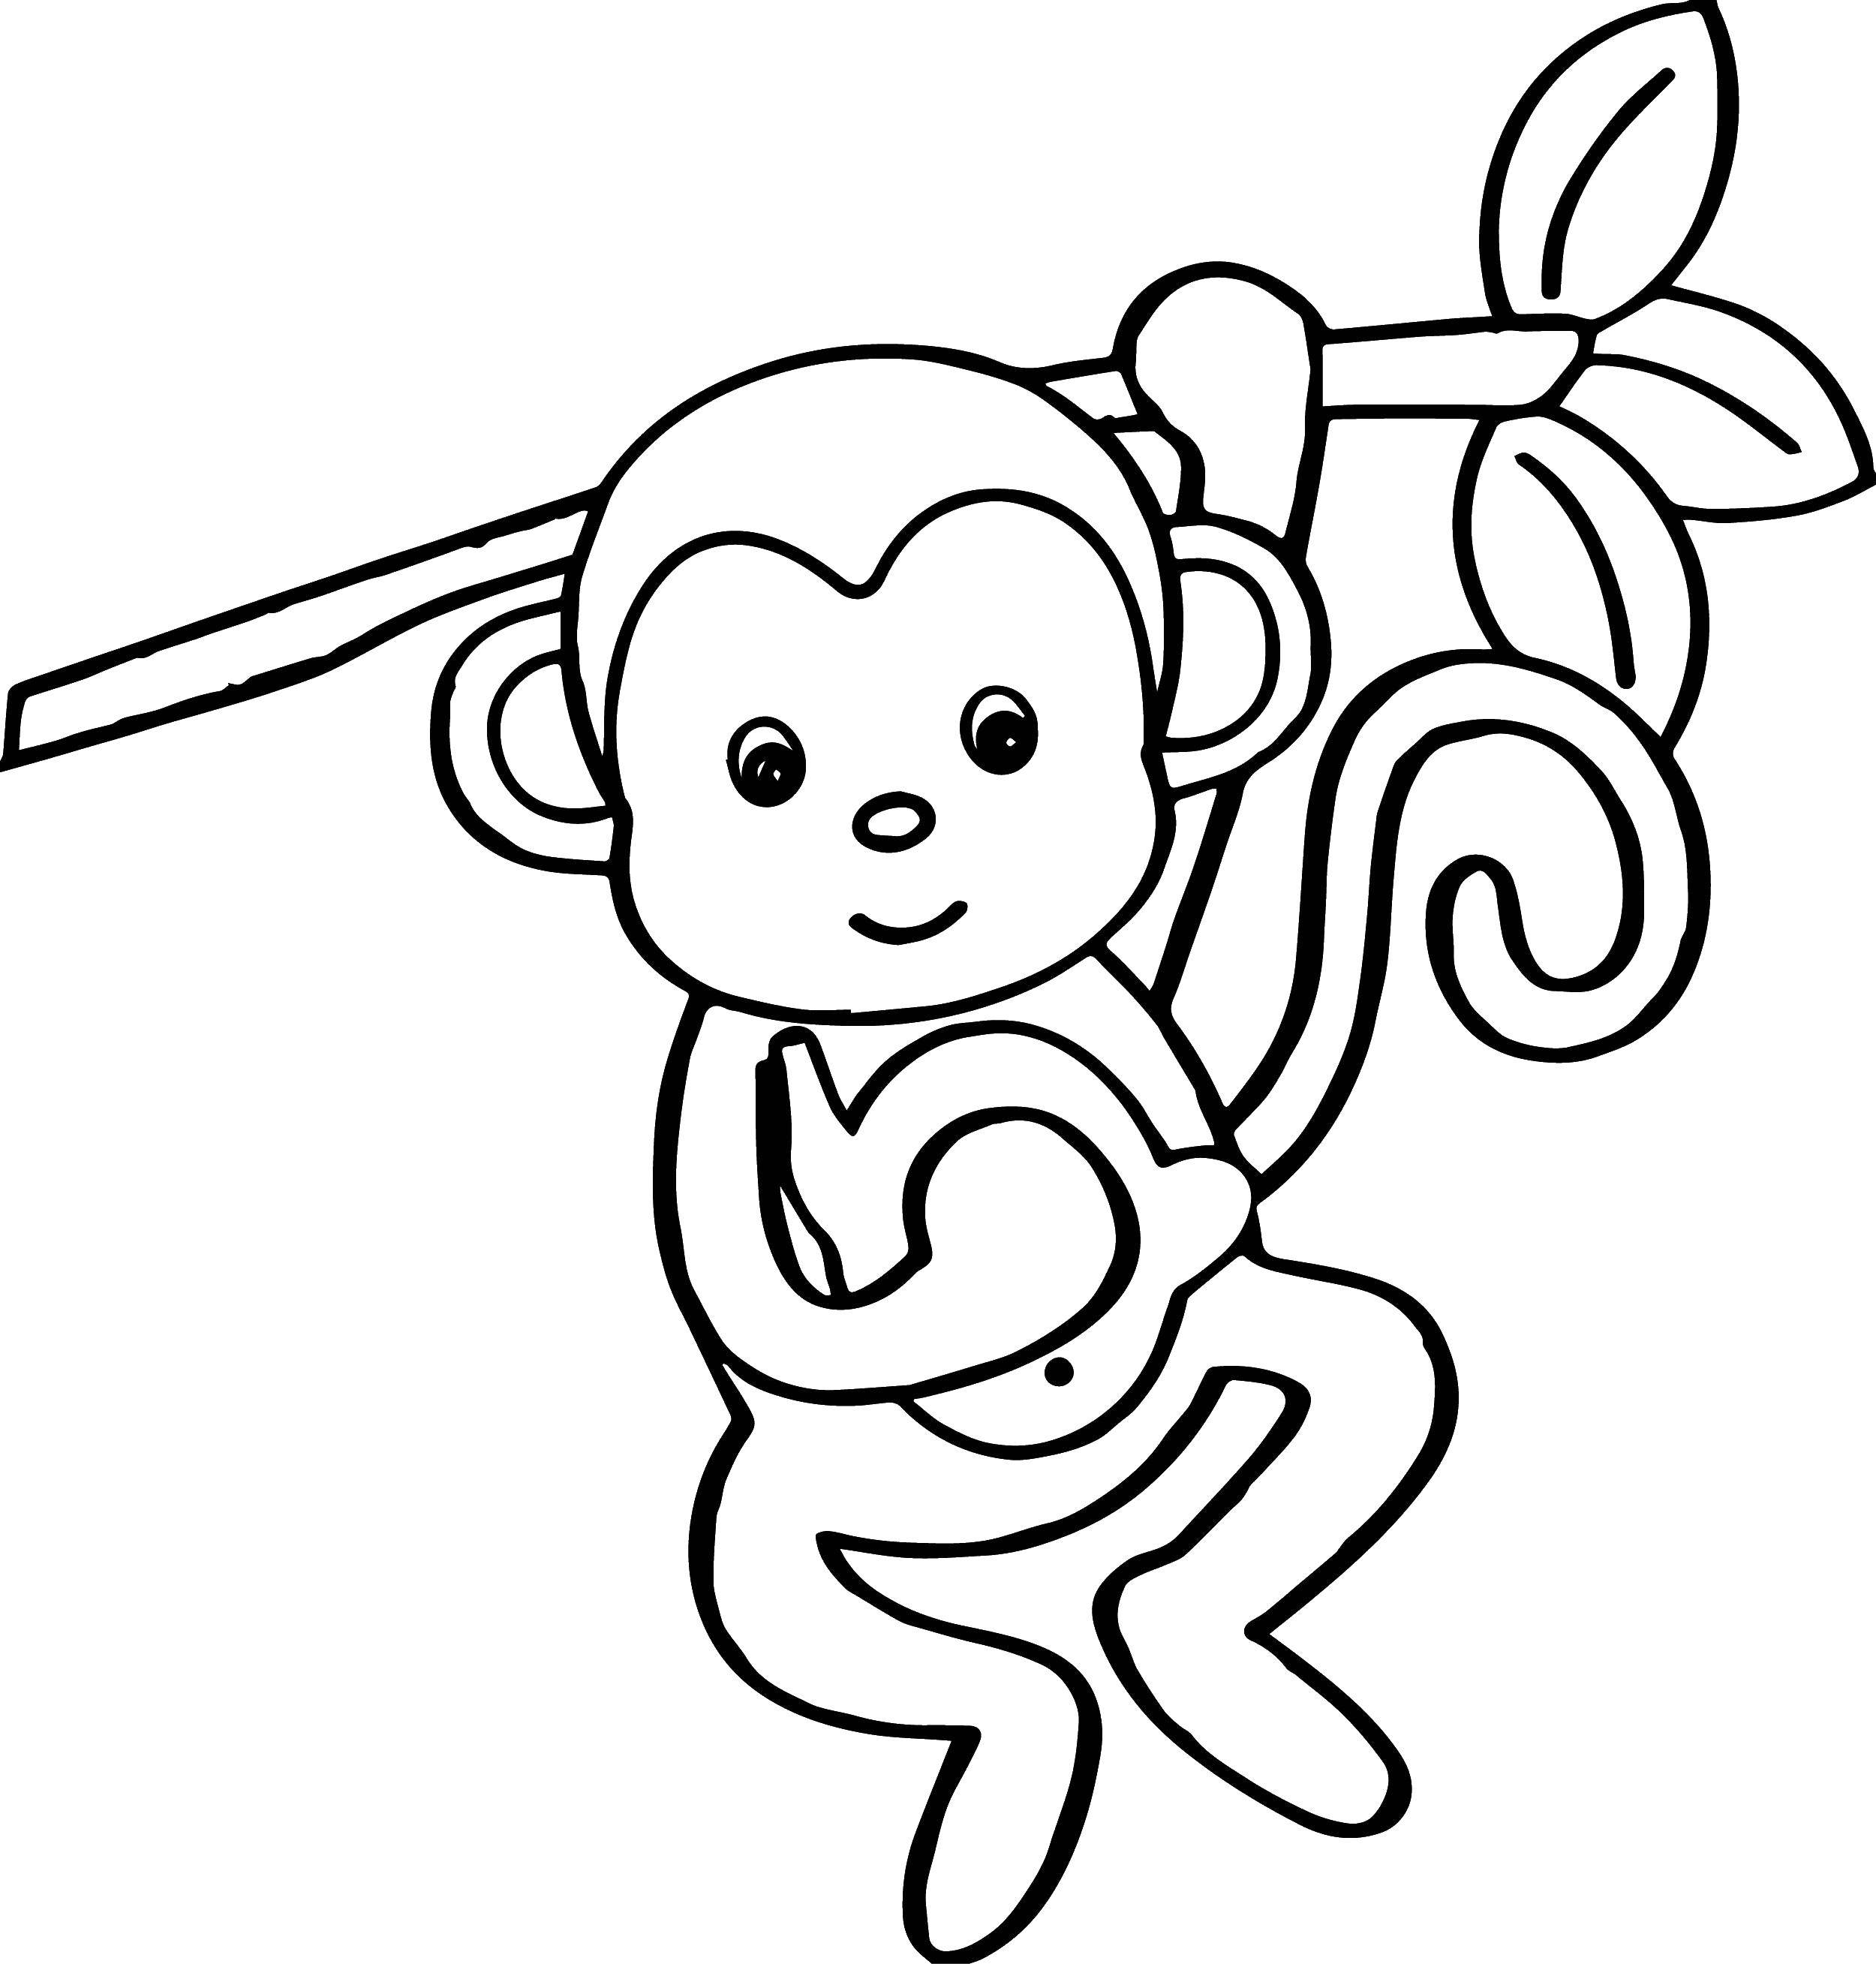 Coloring Monkey on a branch. Category APE. Tags:  APE.